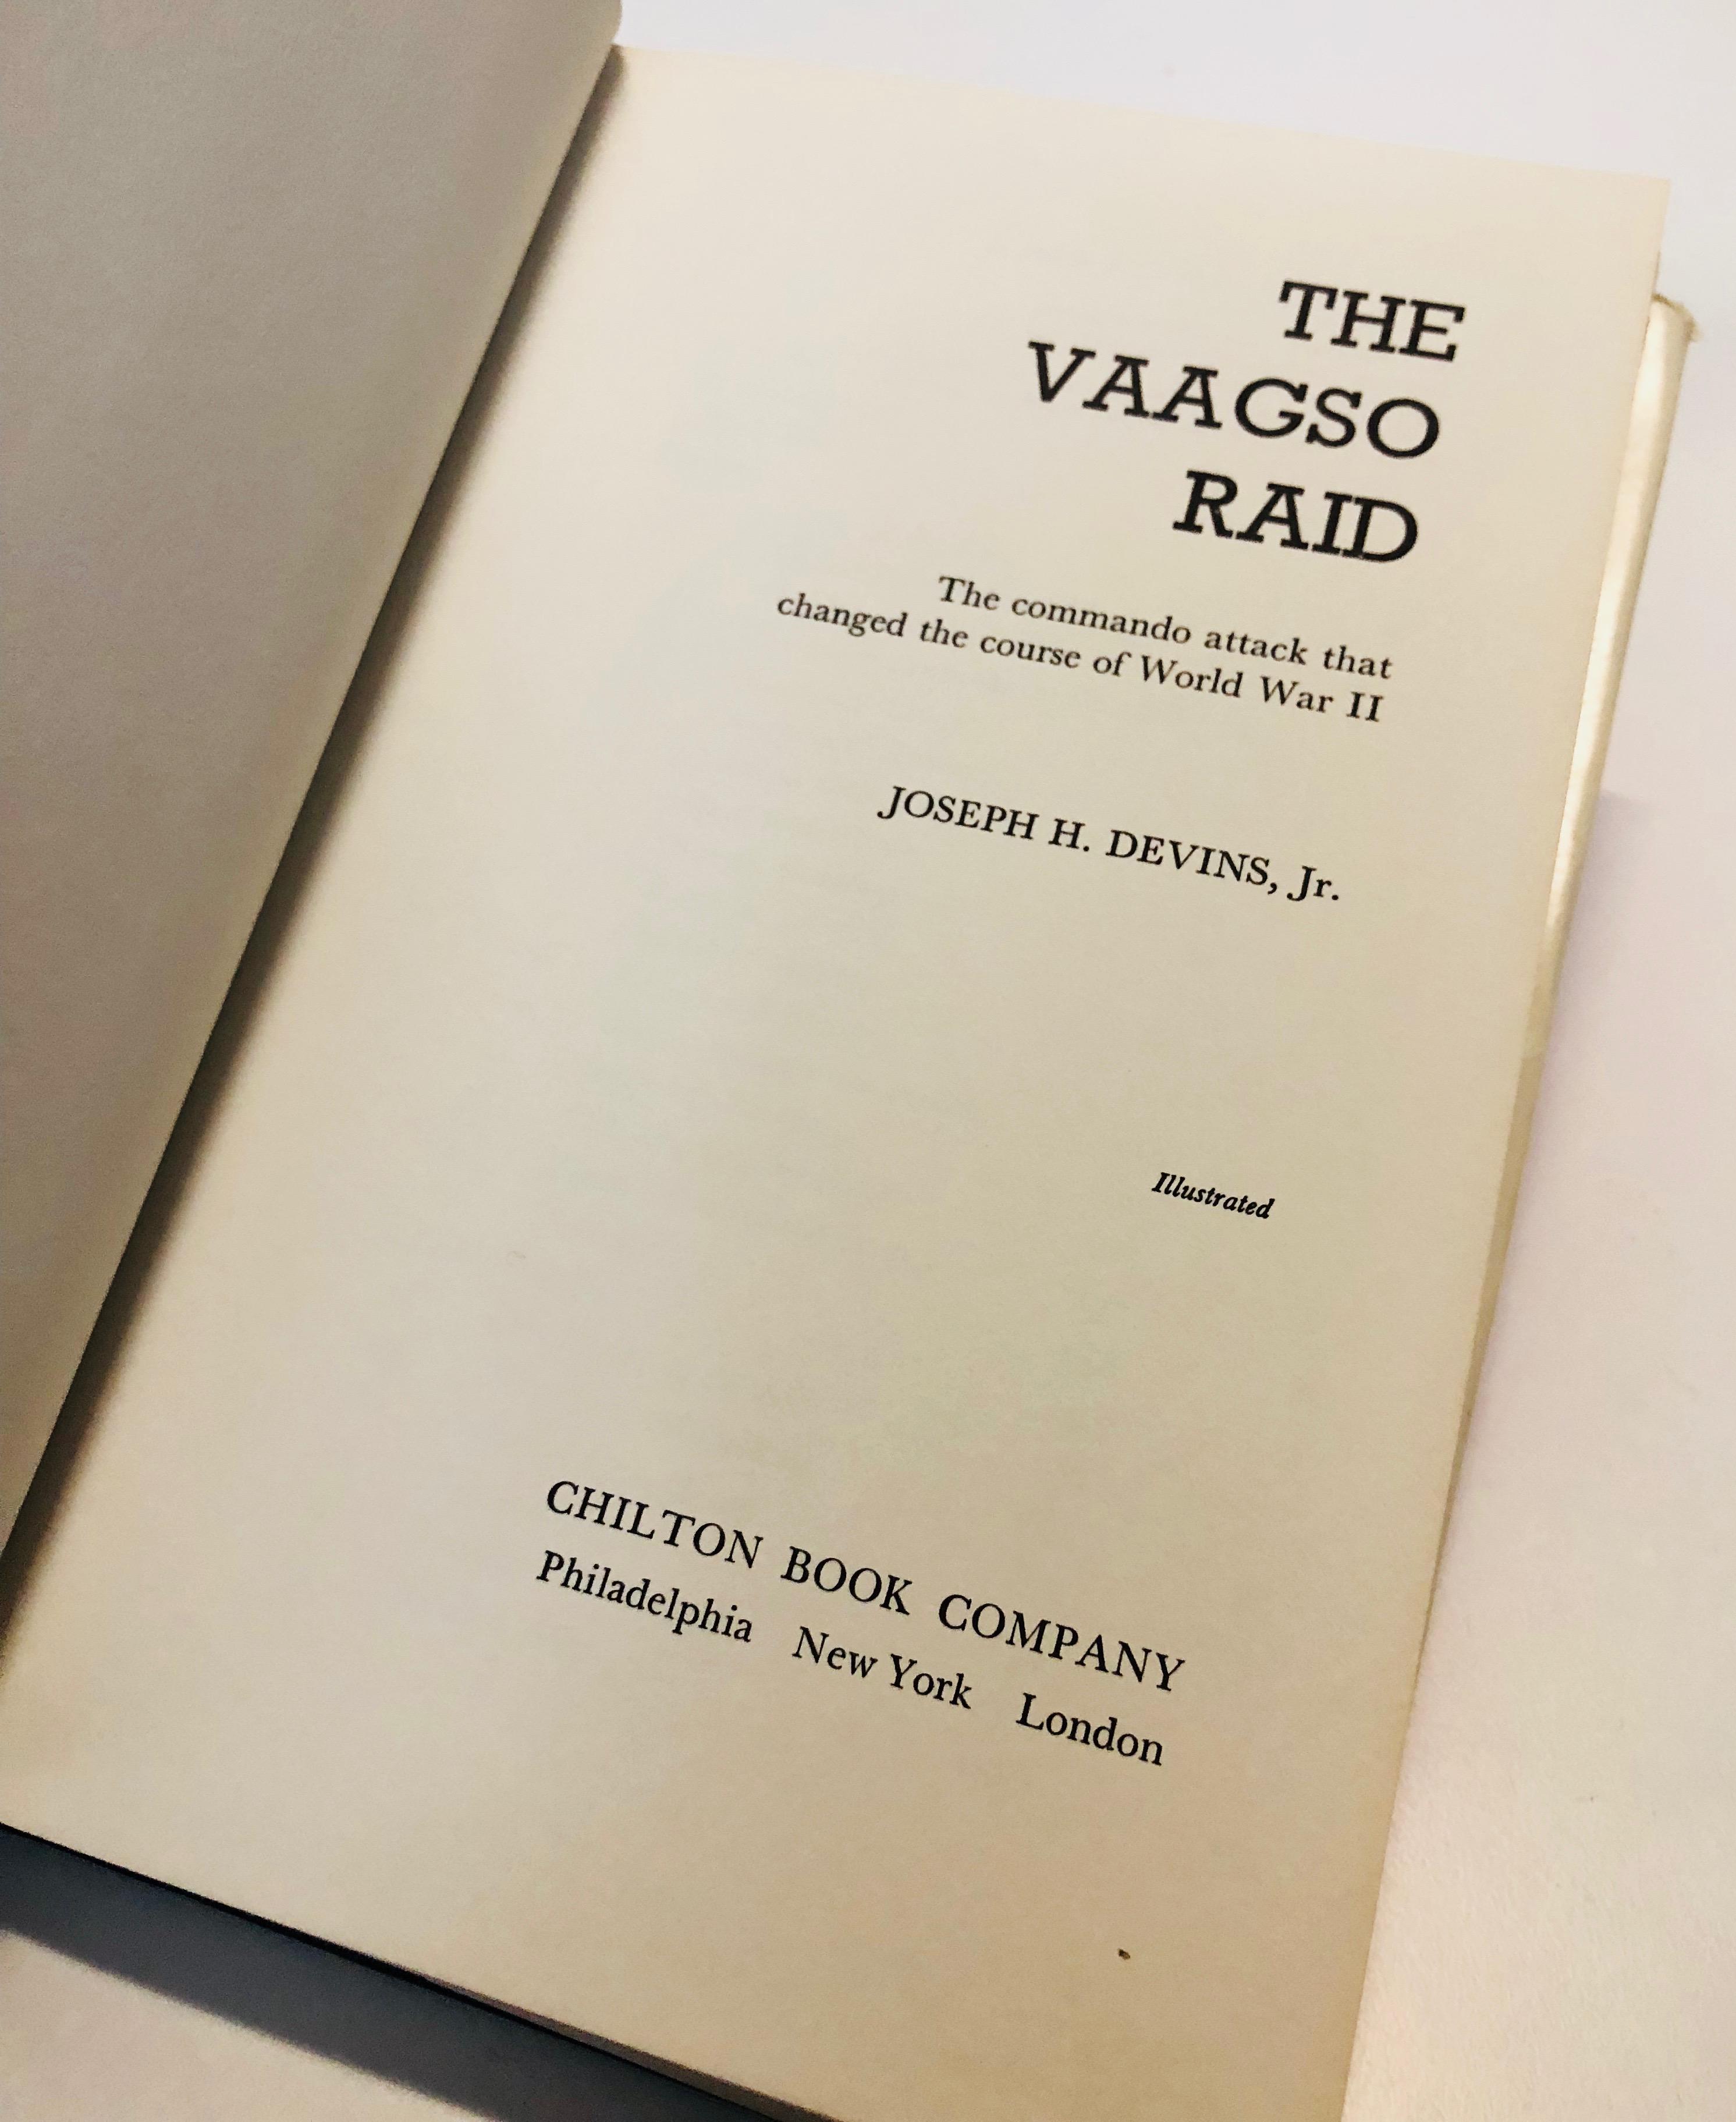 THE VAAGSO RAID (1967) Commando Attack that Changed WWII